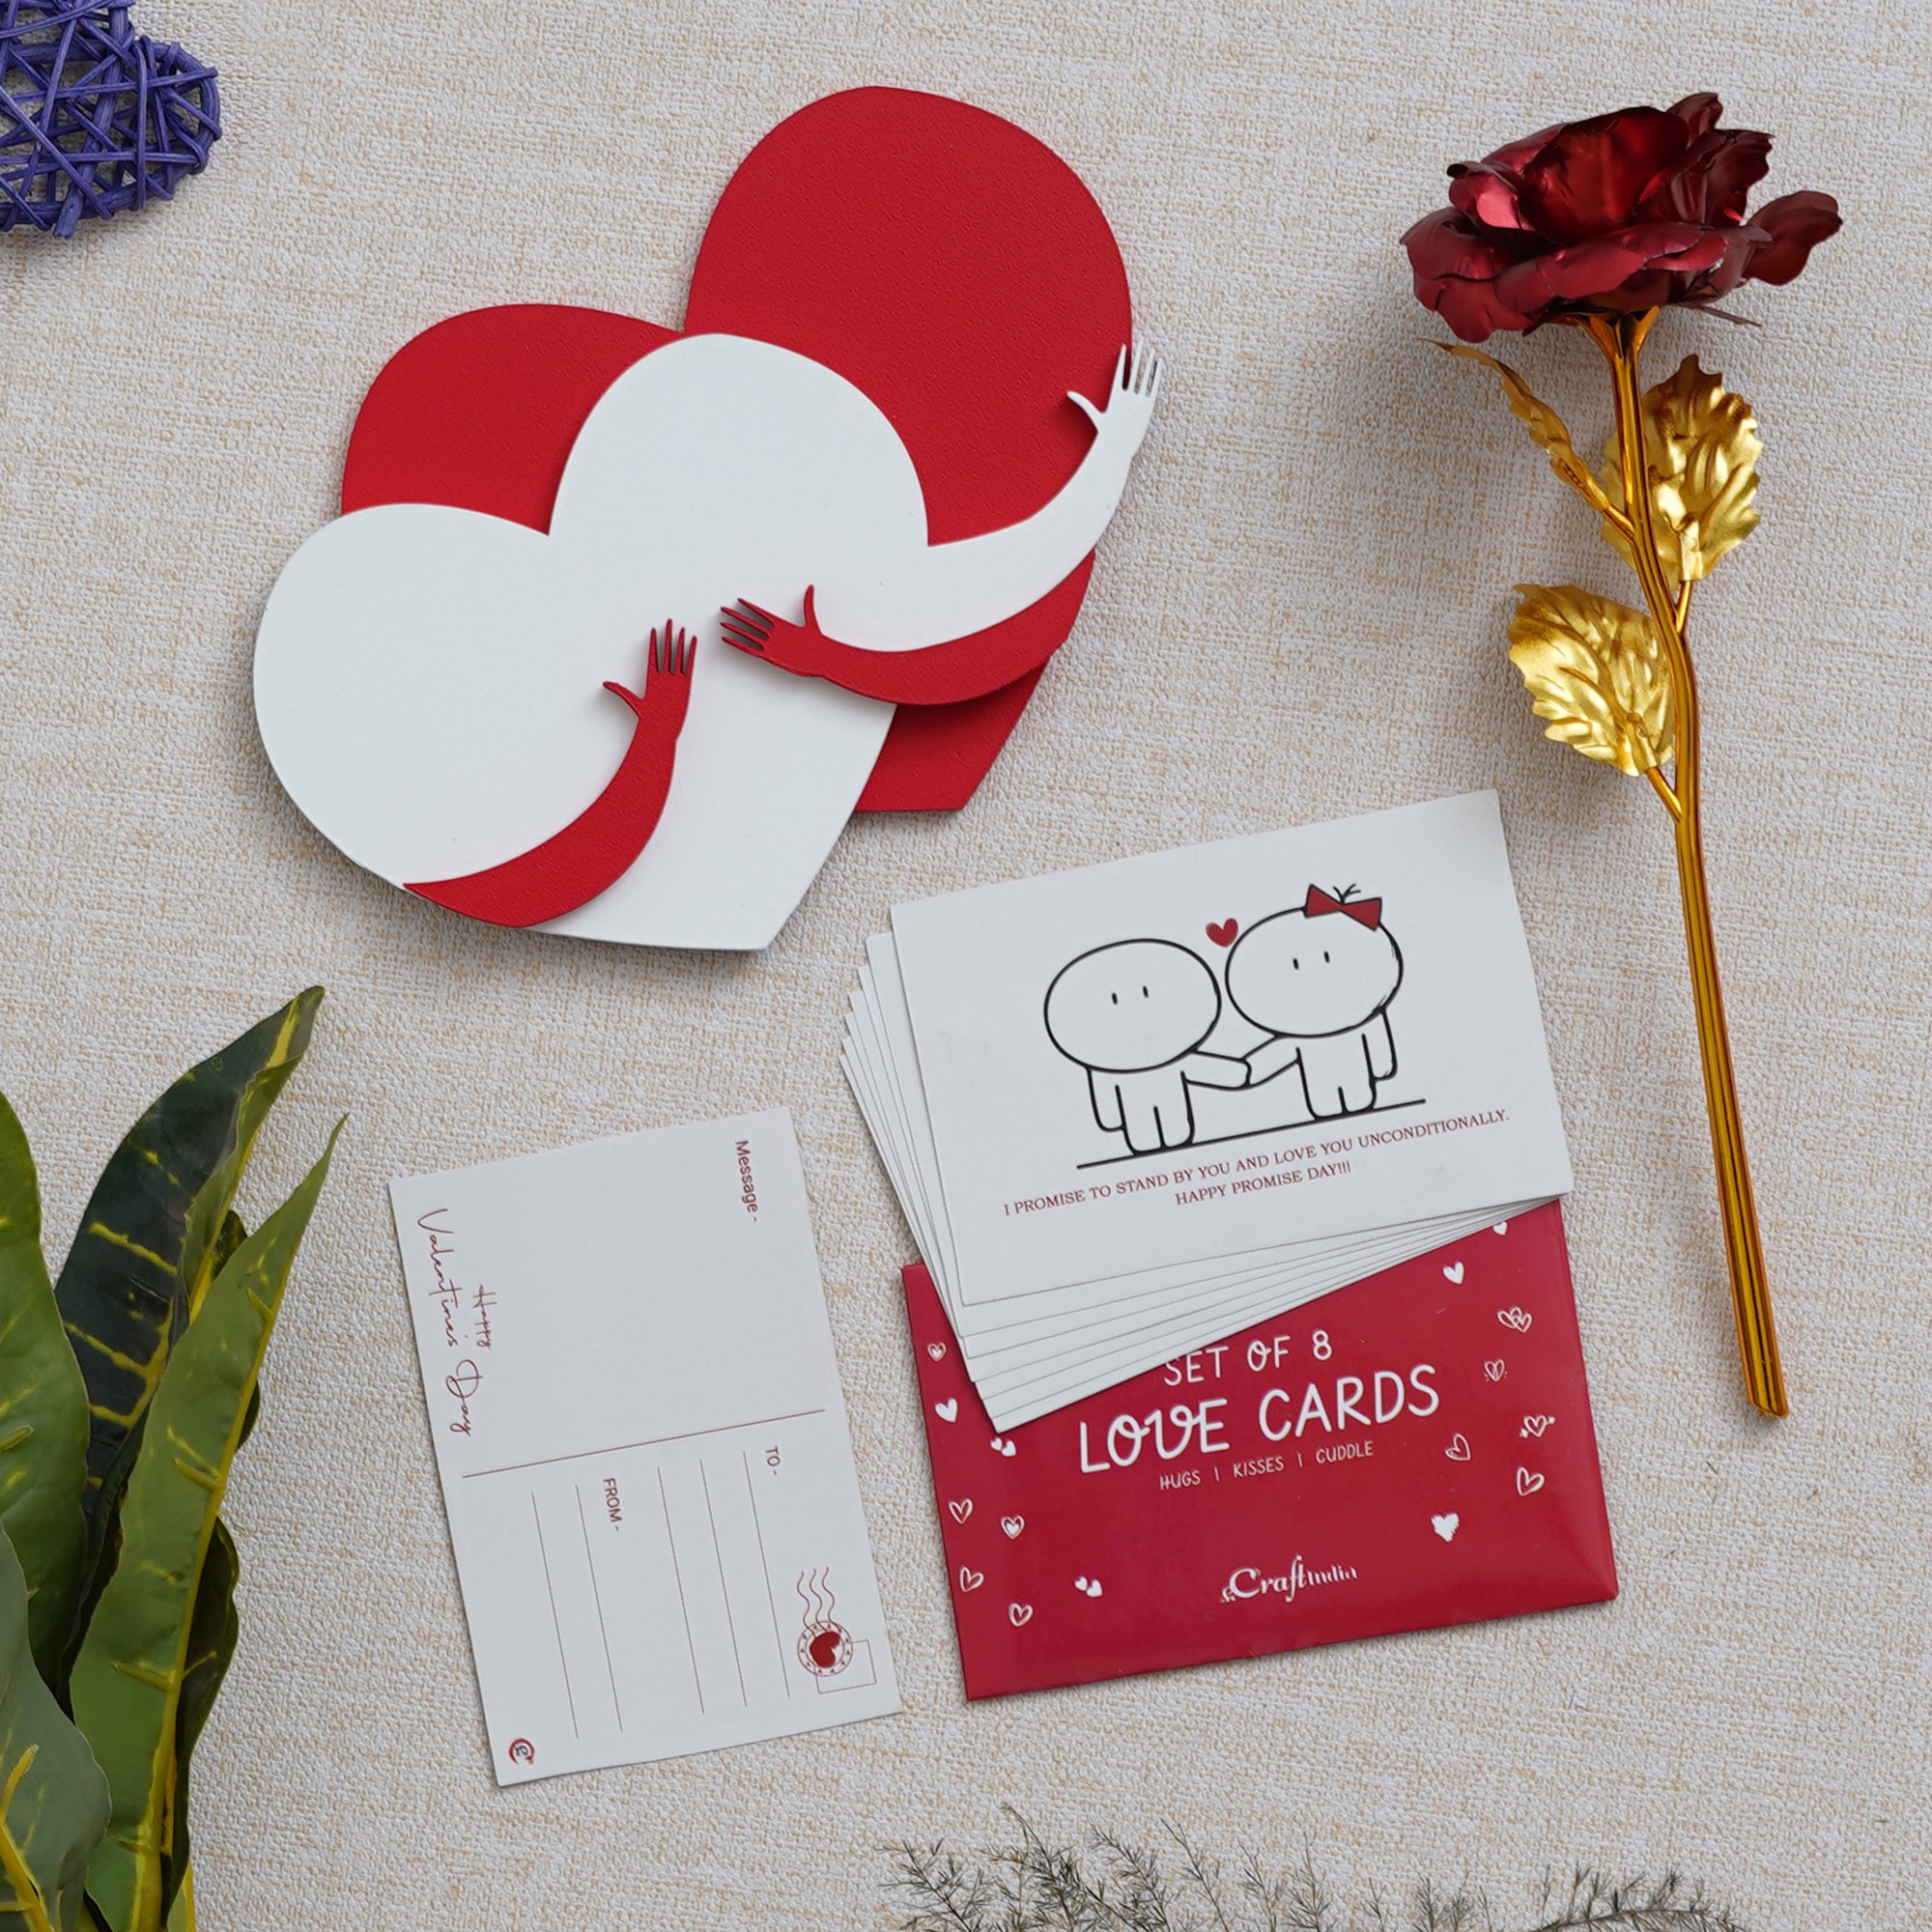 Valentine Combo of Pack of 8 Love Gift Cards, Golden Red Rose Gift Set, Red and White Heart Hugging Each Other Gift Set